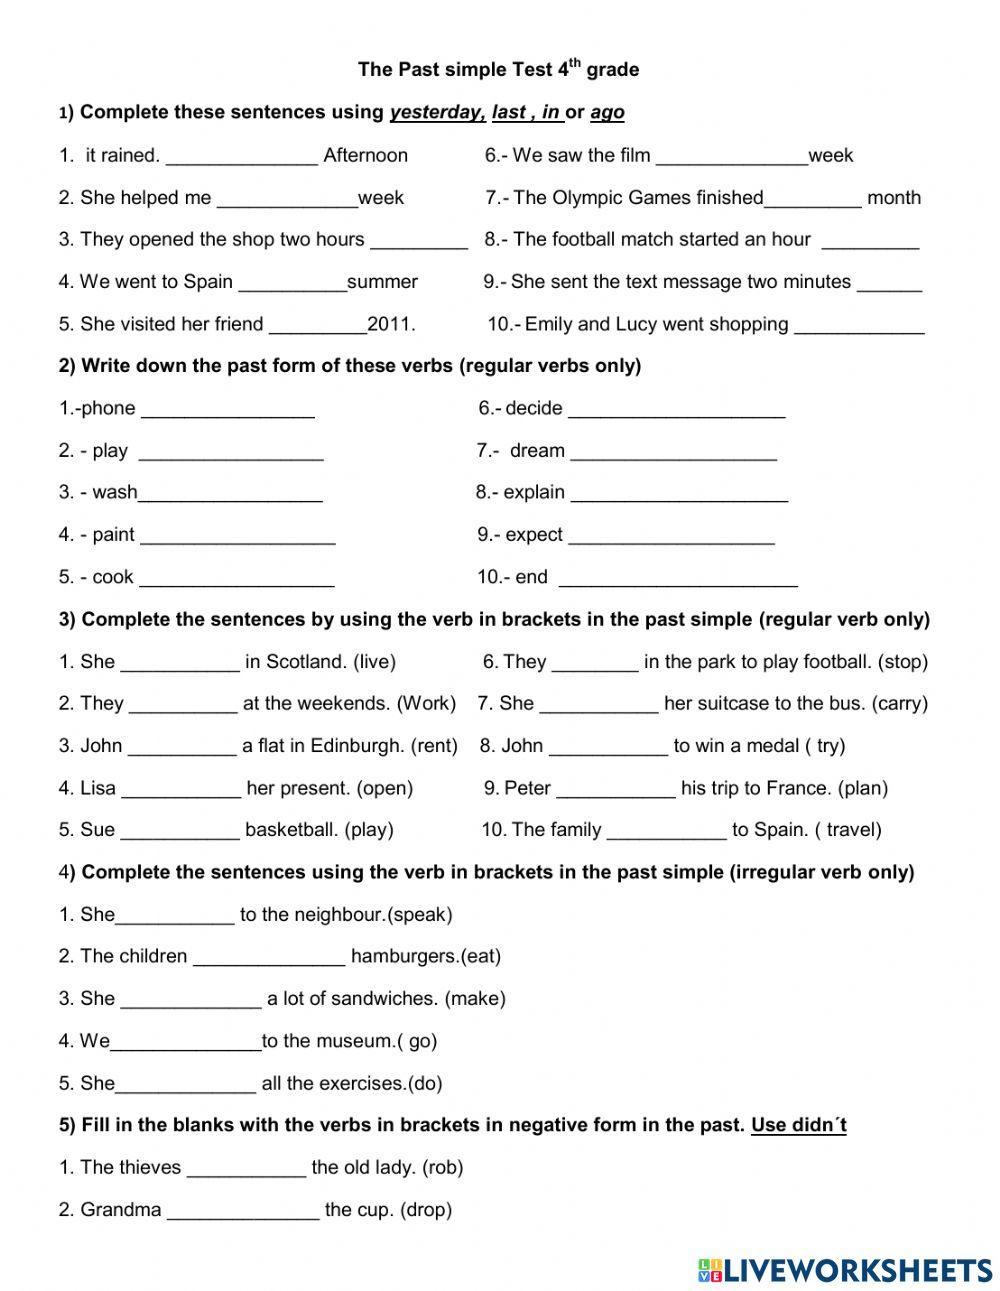 The Past Simple Tense 4th Grade